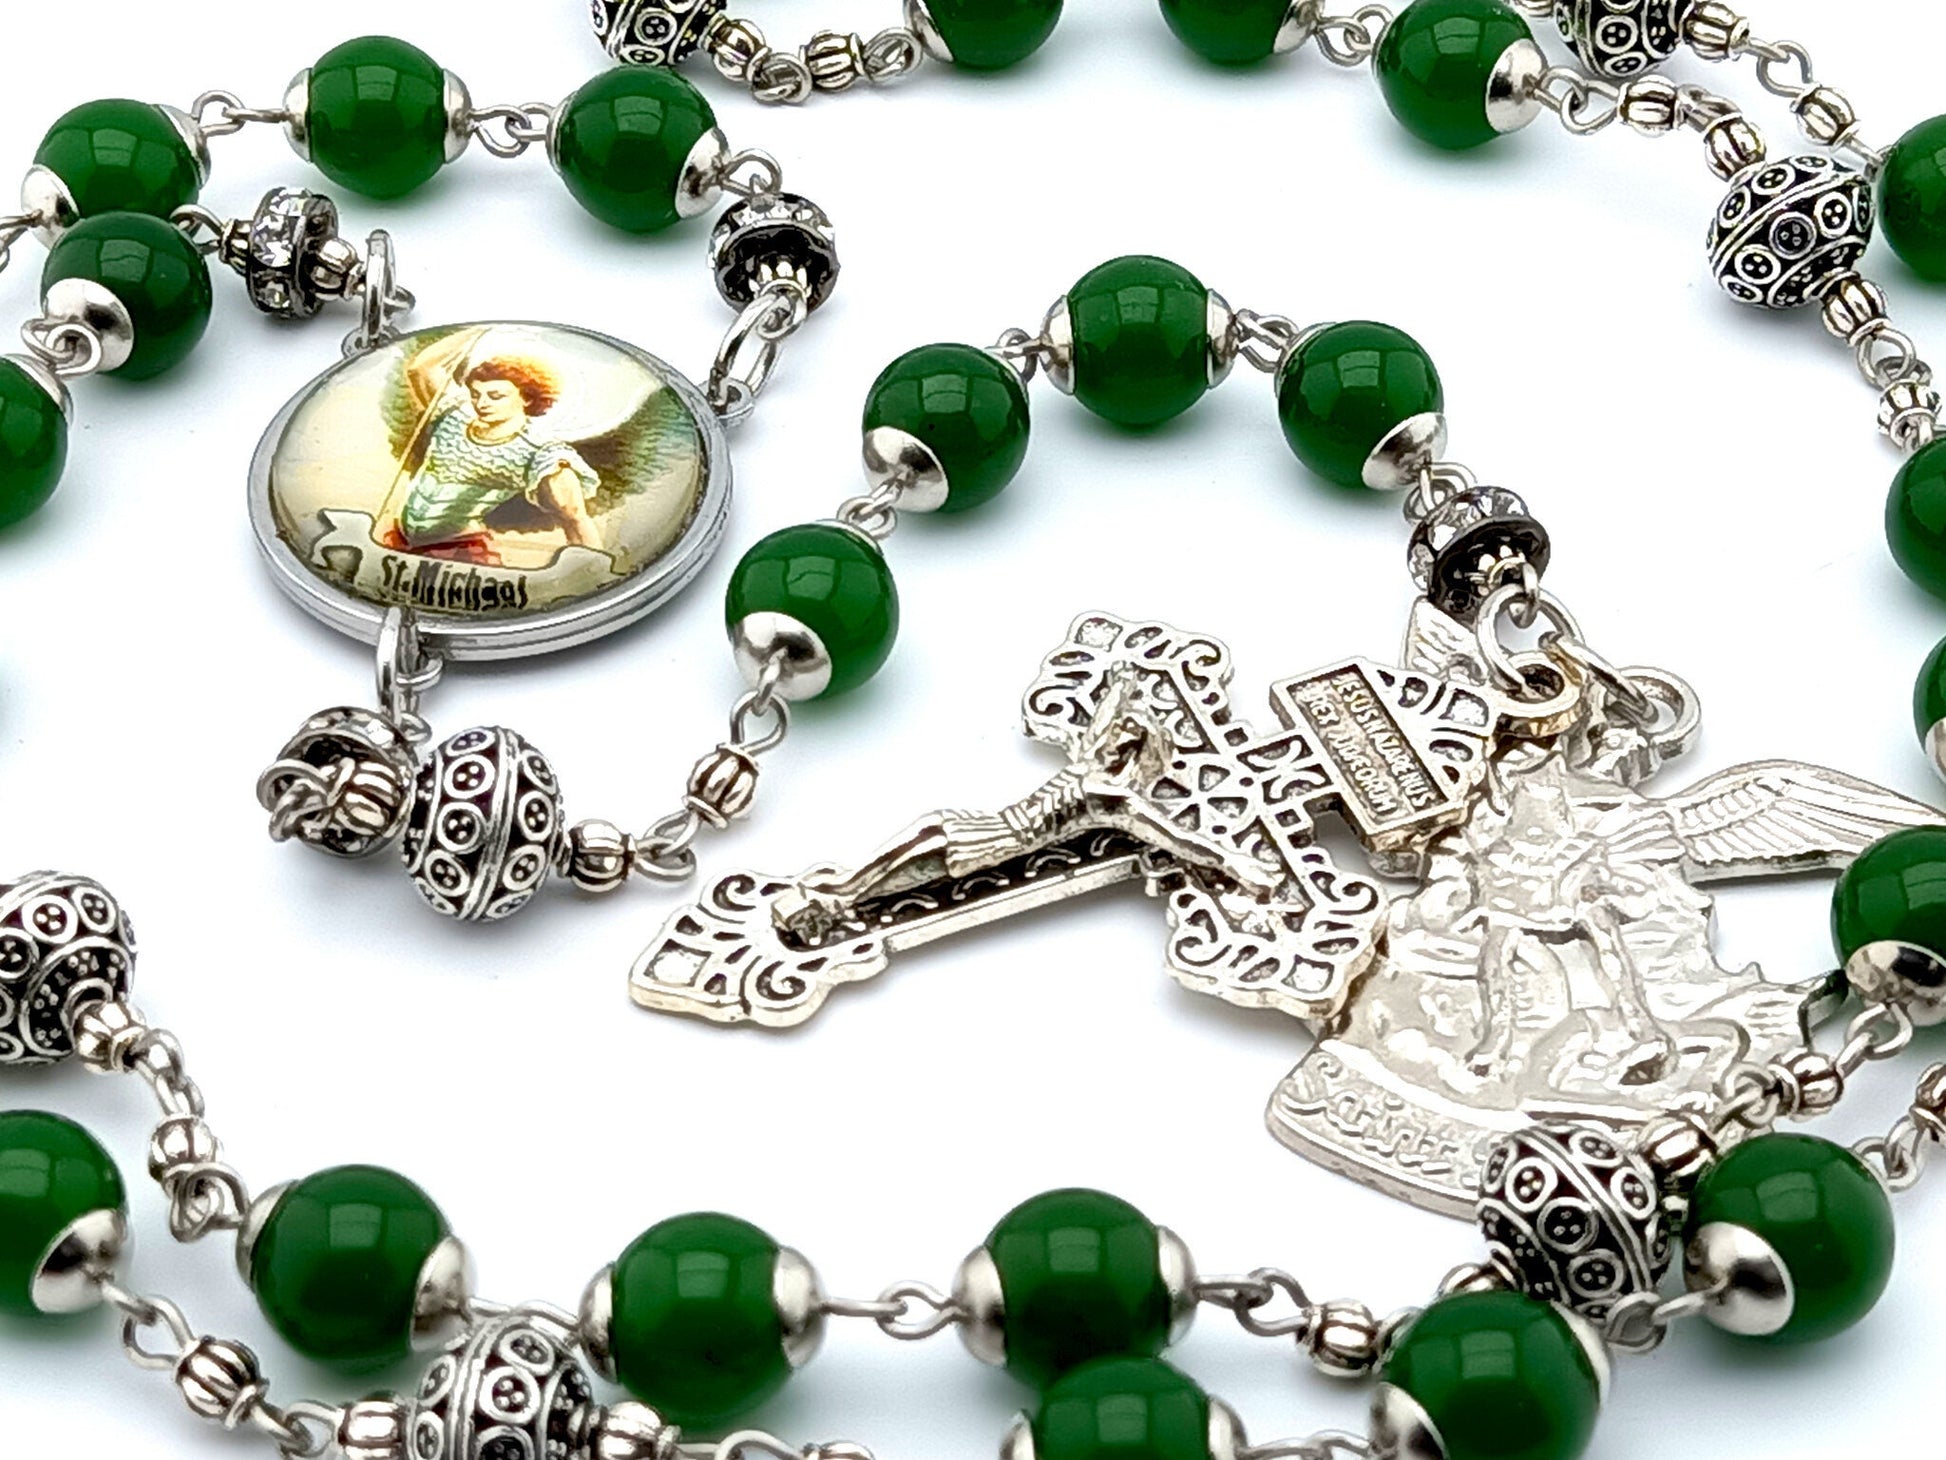 Saint Michael unique rosary beads prayer chaplet with green gemstone and silver beads, silver pardon crucifix and picture centre medal.